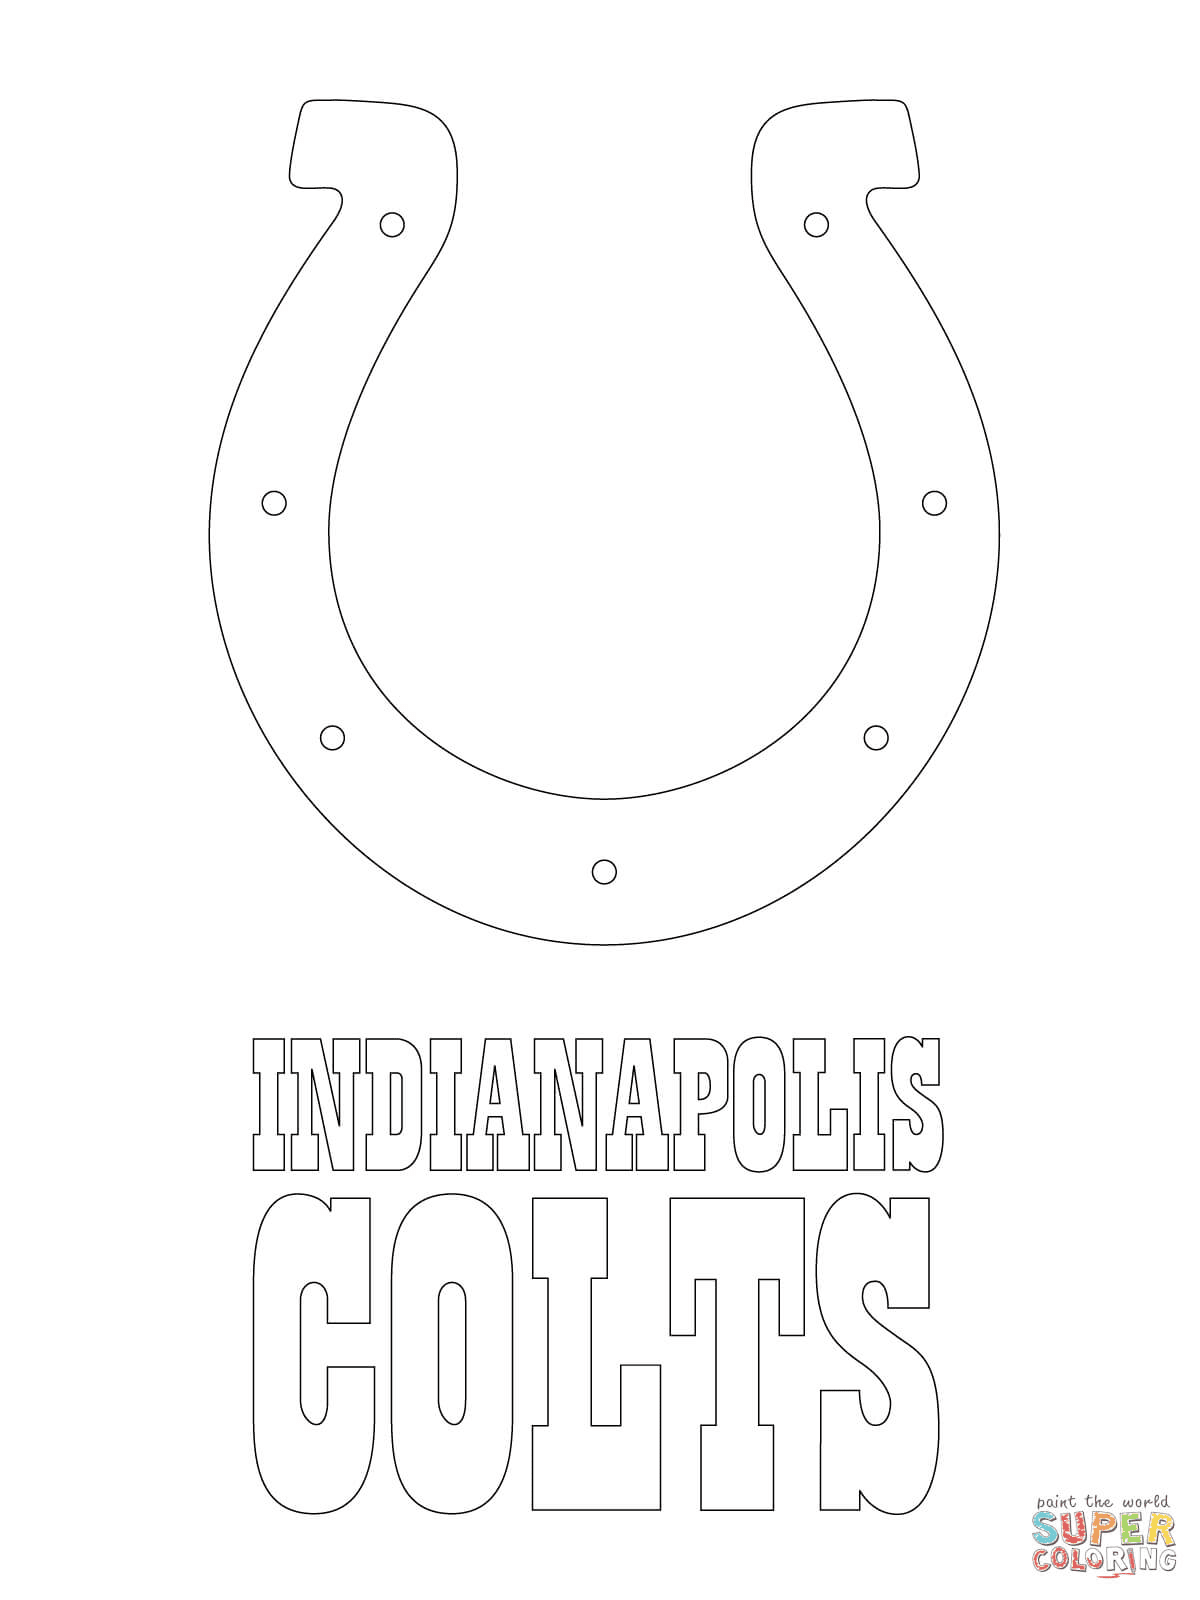 Indianapolis Colts Logo Coloring Pages